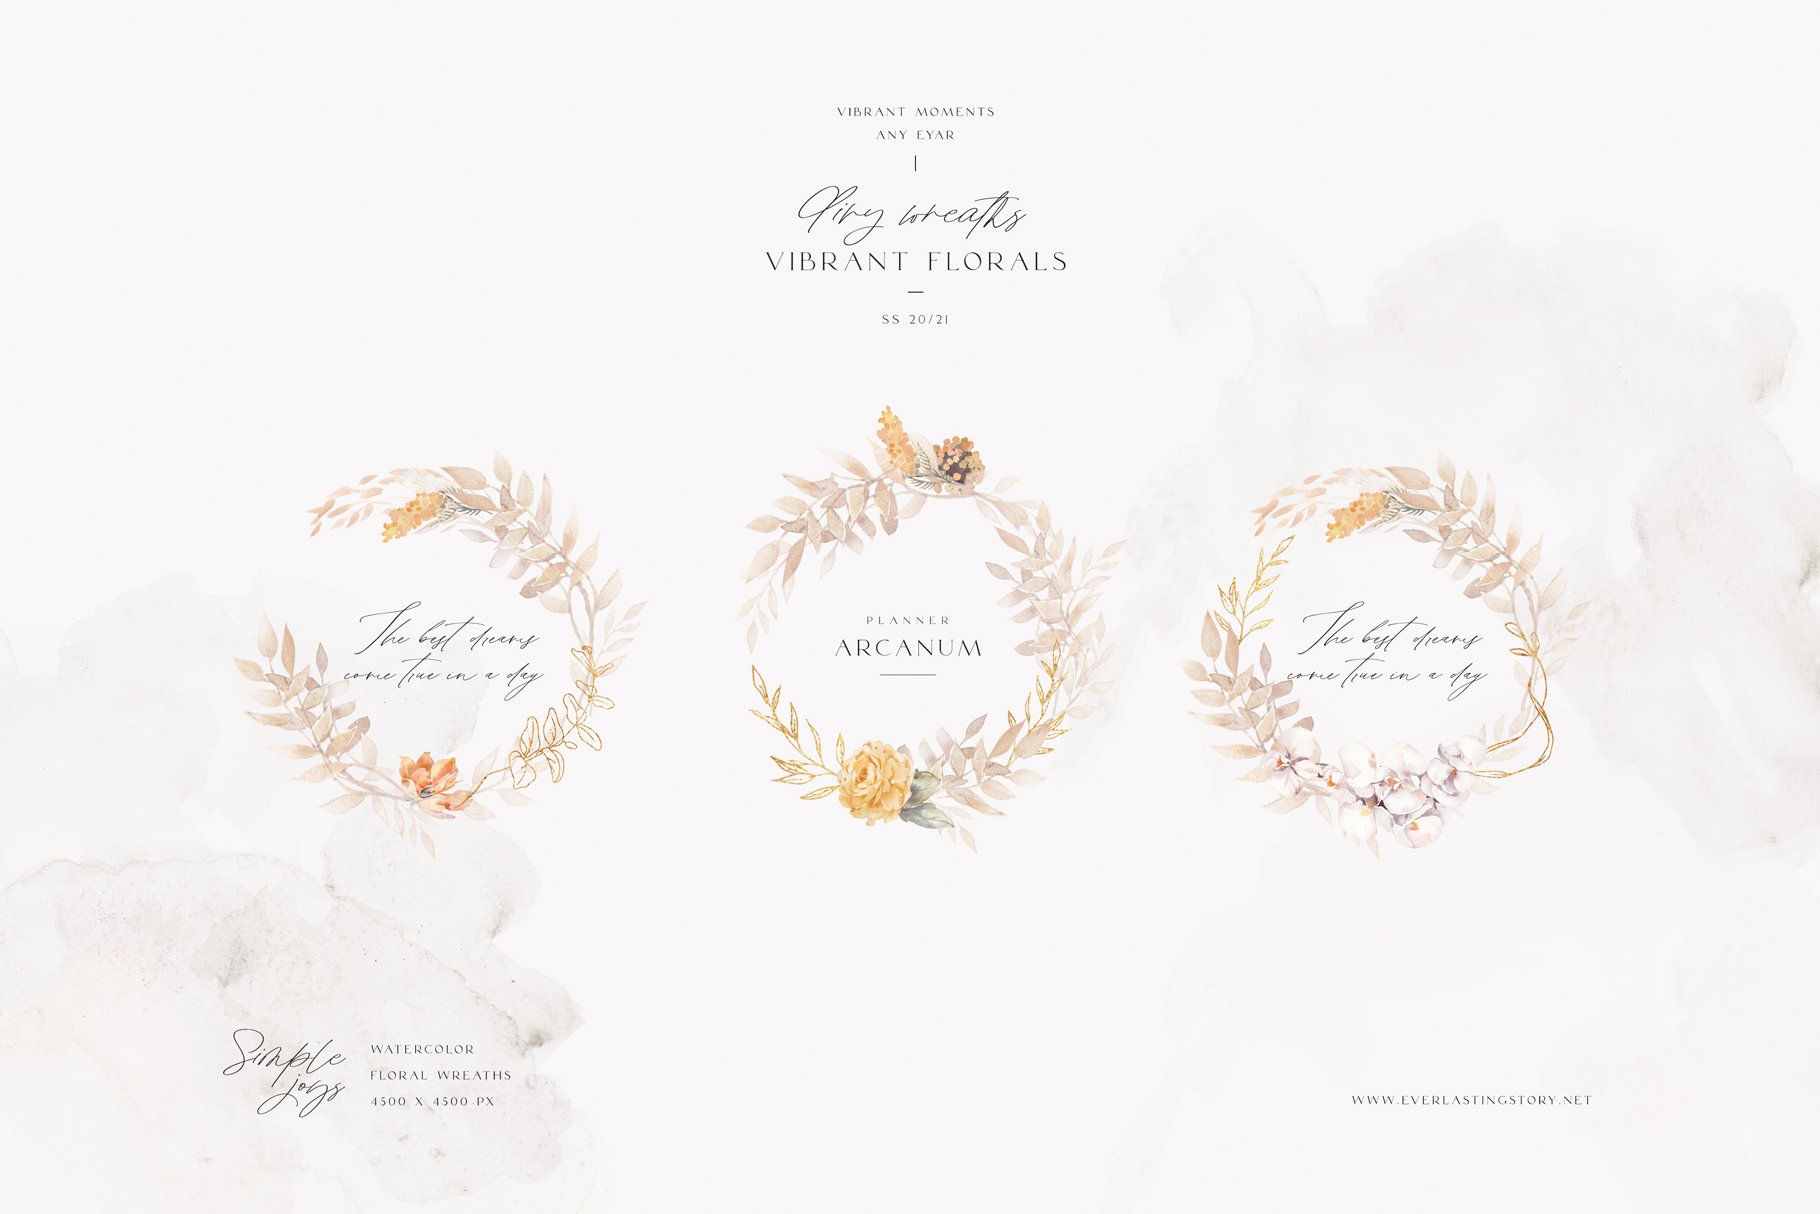 The wedding stationery is designed with watercolor flowers and leaves.